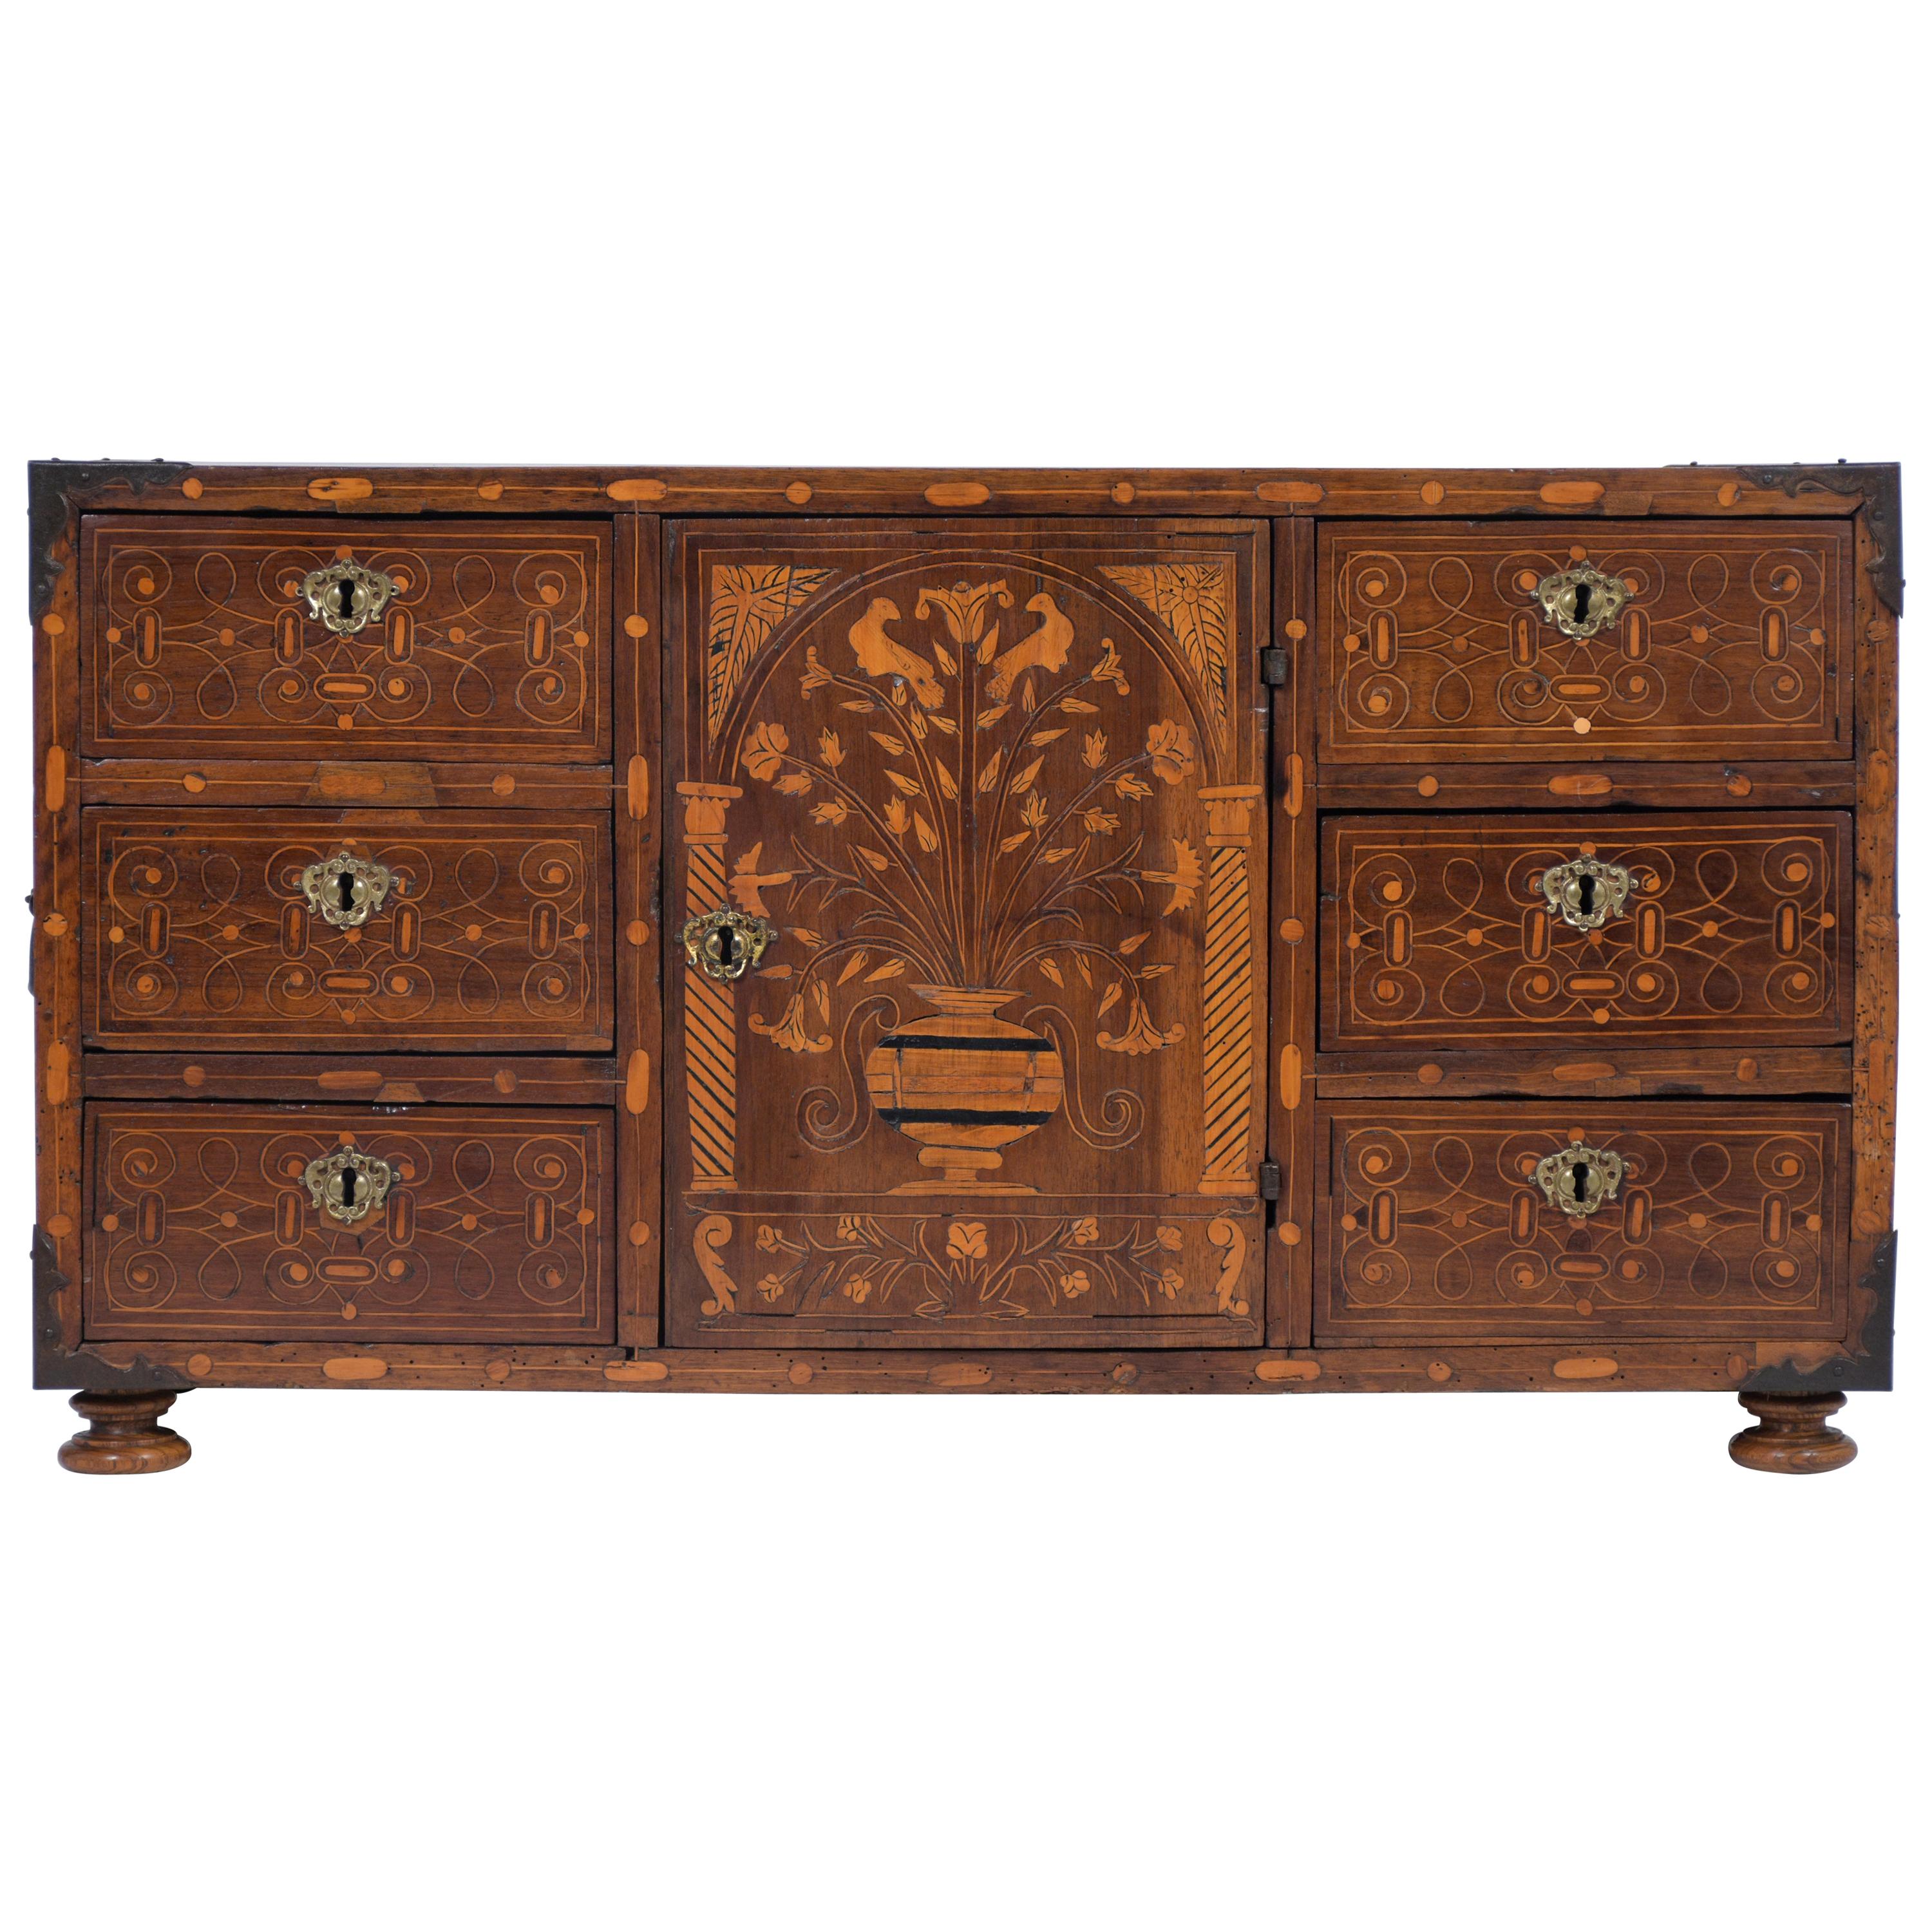 This exquisite 18th-century Spanish Baroque cabinet has marquetry inlays along the front and sides and is stained in a rich walnut color with a waxed patina finish. The jewelry box has wrought iron details, six drawers adorned with their original